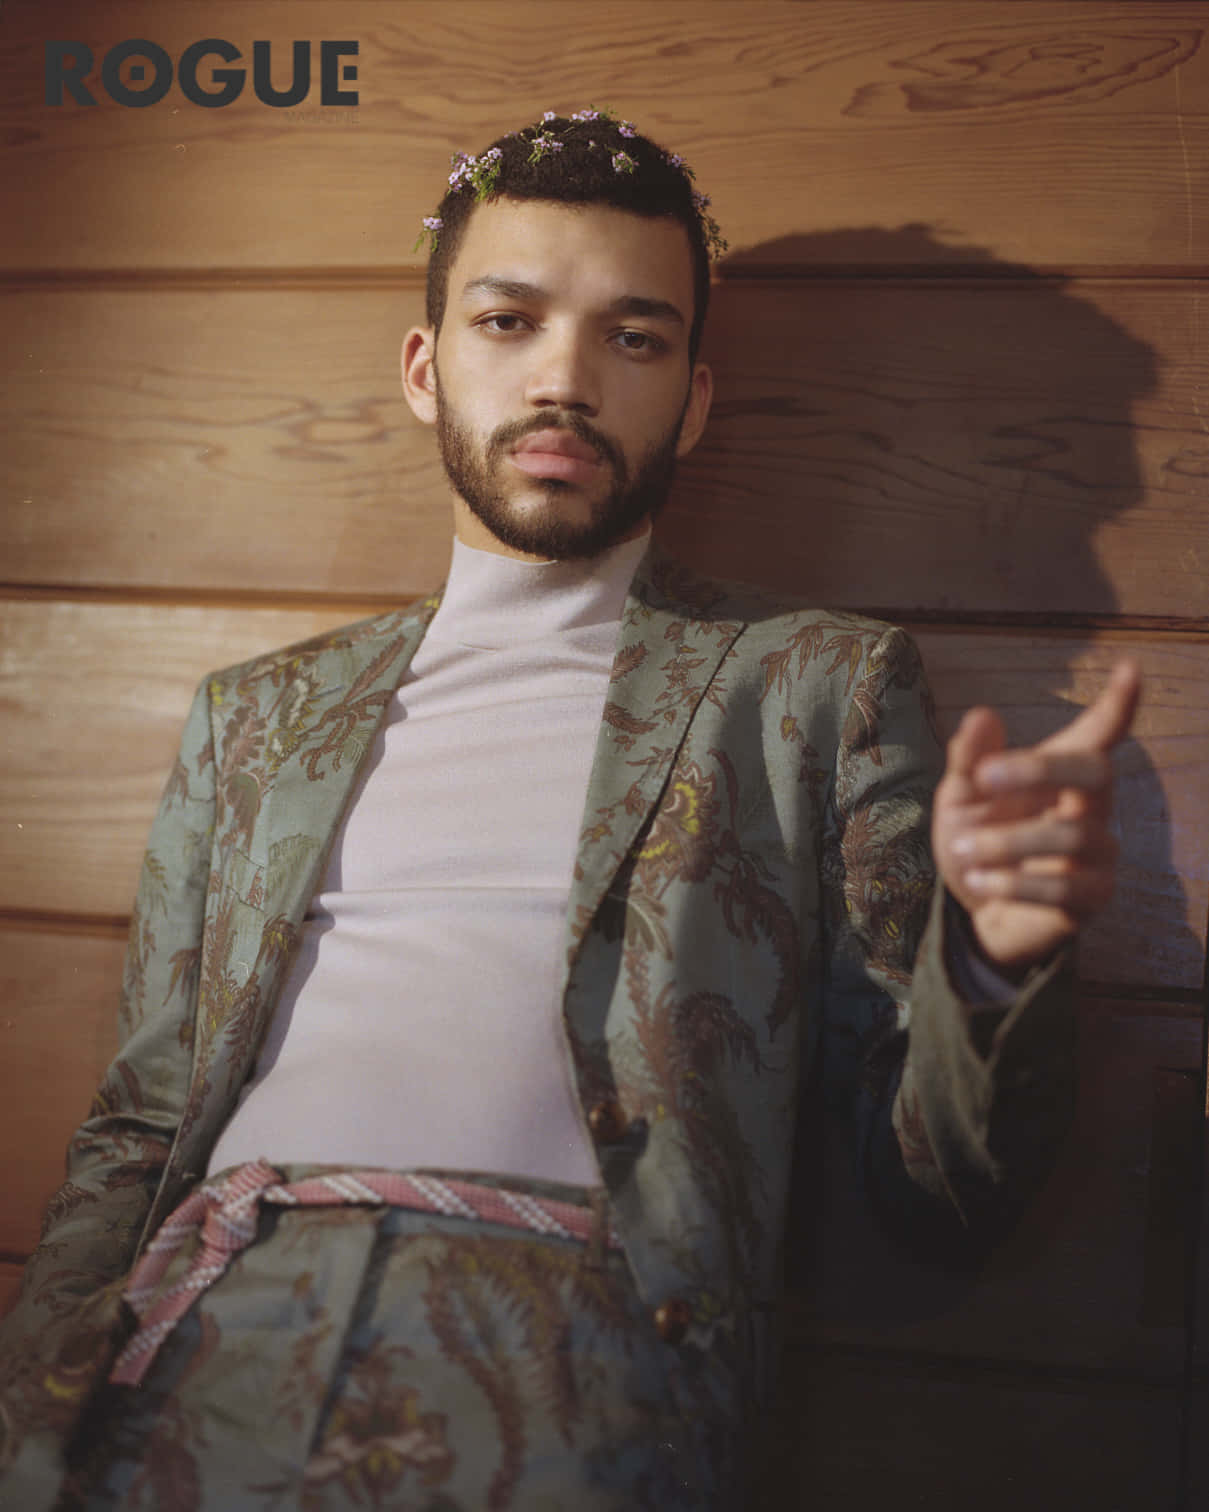 Justice Smith Looking Pensive In A Portrait Photo Shoot. Wallpaper